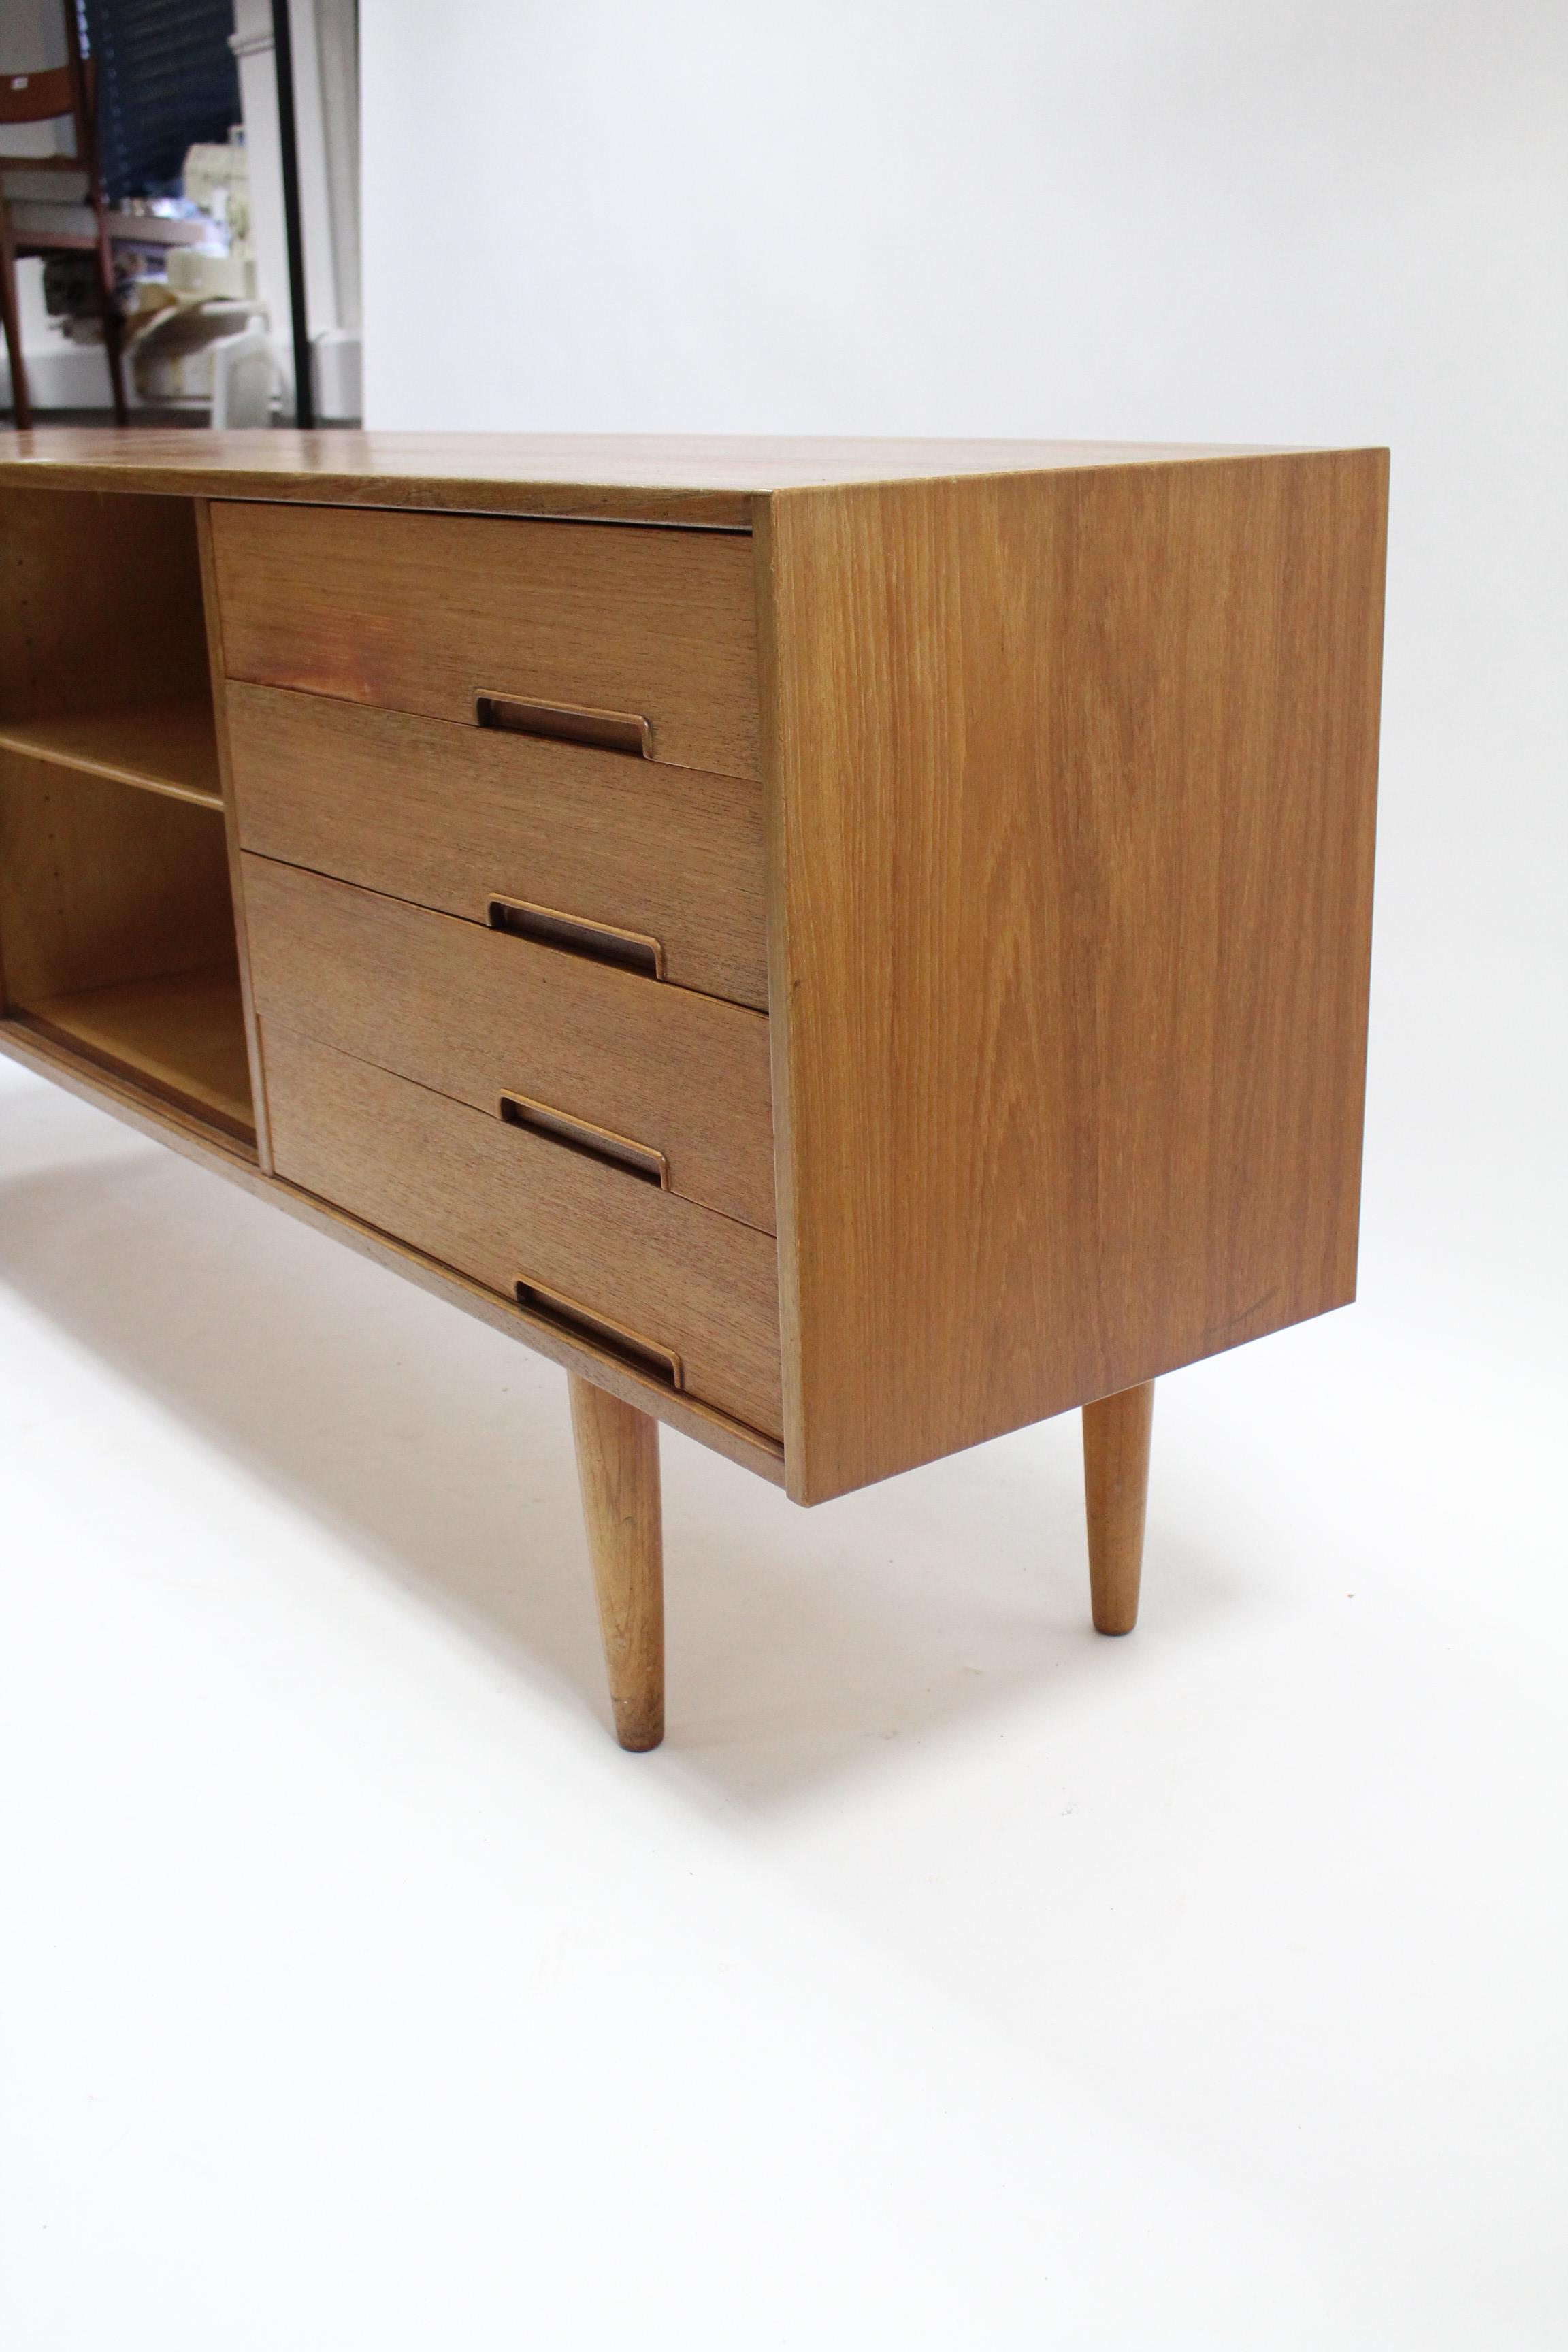 A 1960’s TROEDS OF SWEDEN “TRENTO” TEAK SIDEBOARD fitted four long drawers to the right-hand side, - Image 10 of 12